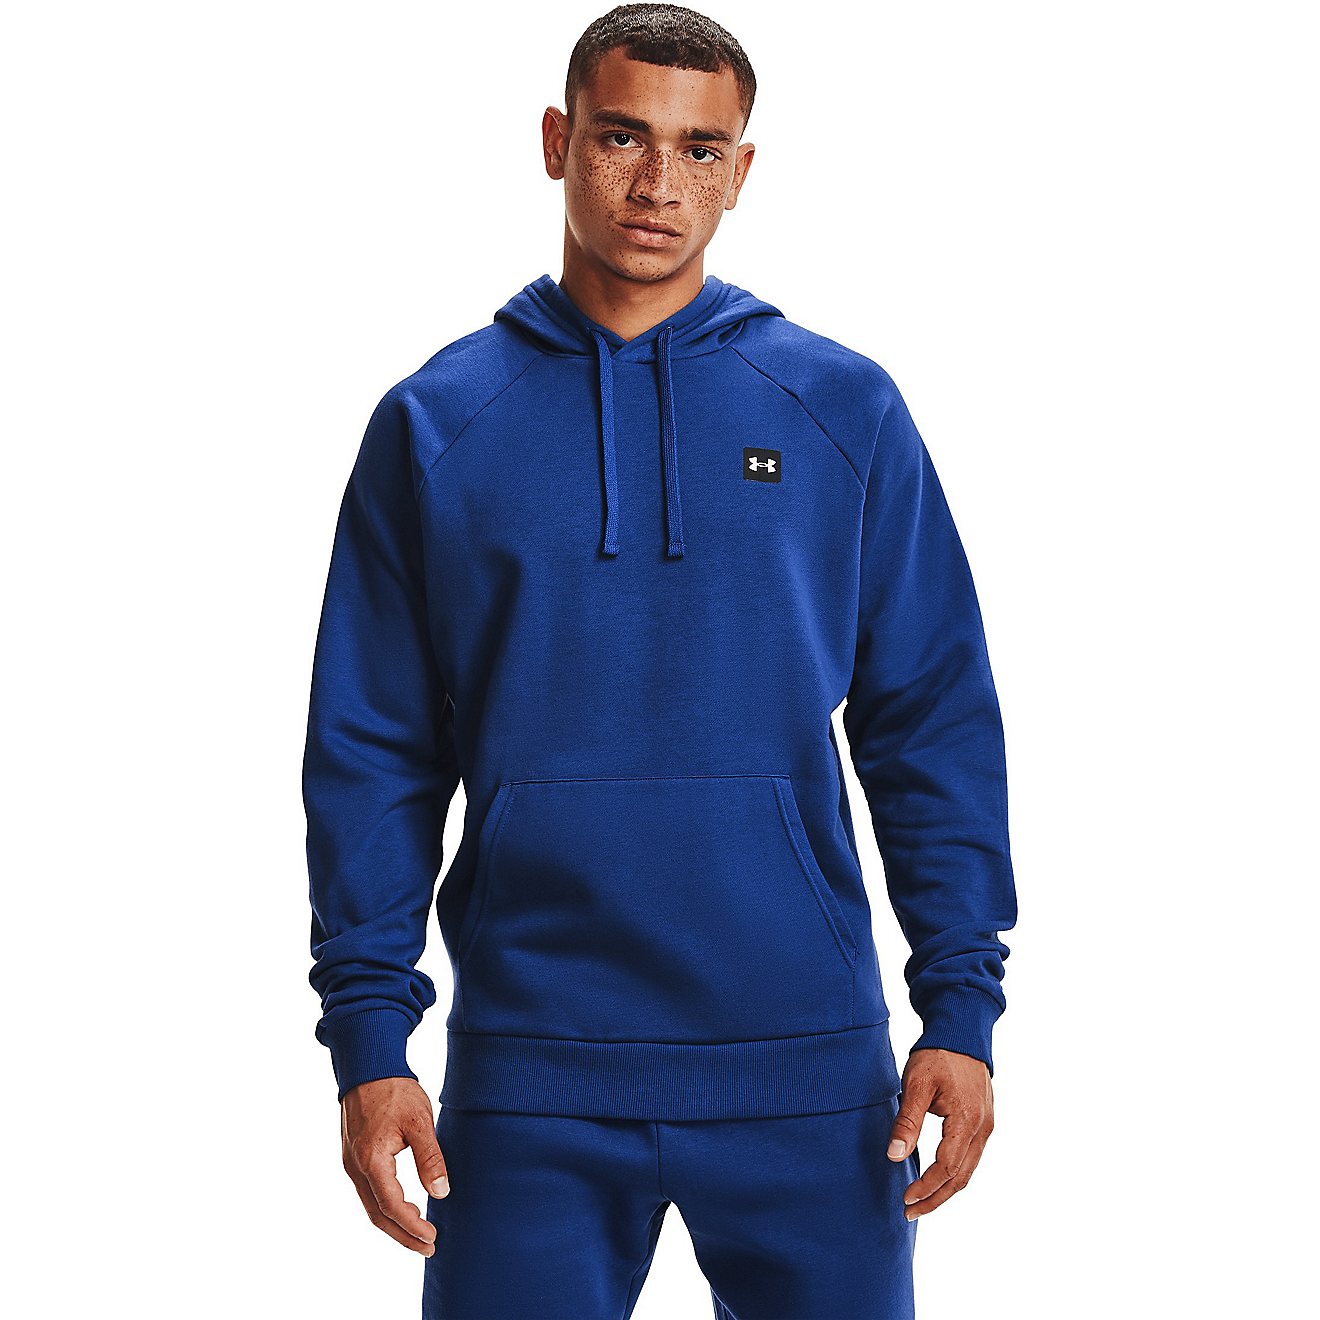 Under Armour Men's Rival Fleece Hoodie | Free Shipping at Academy